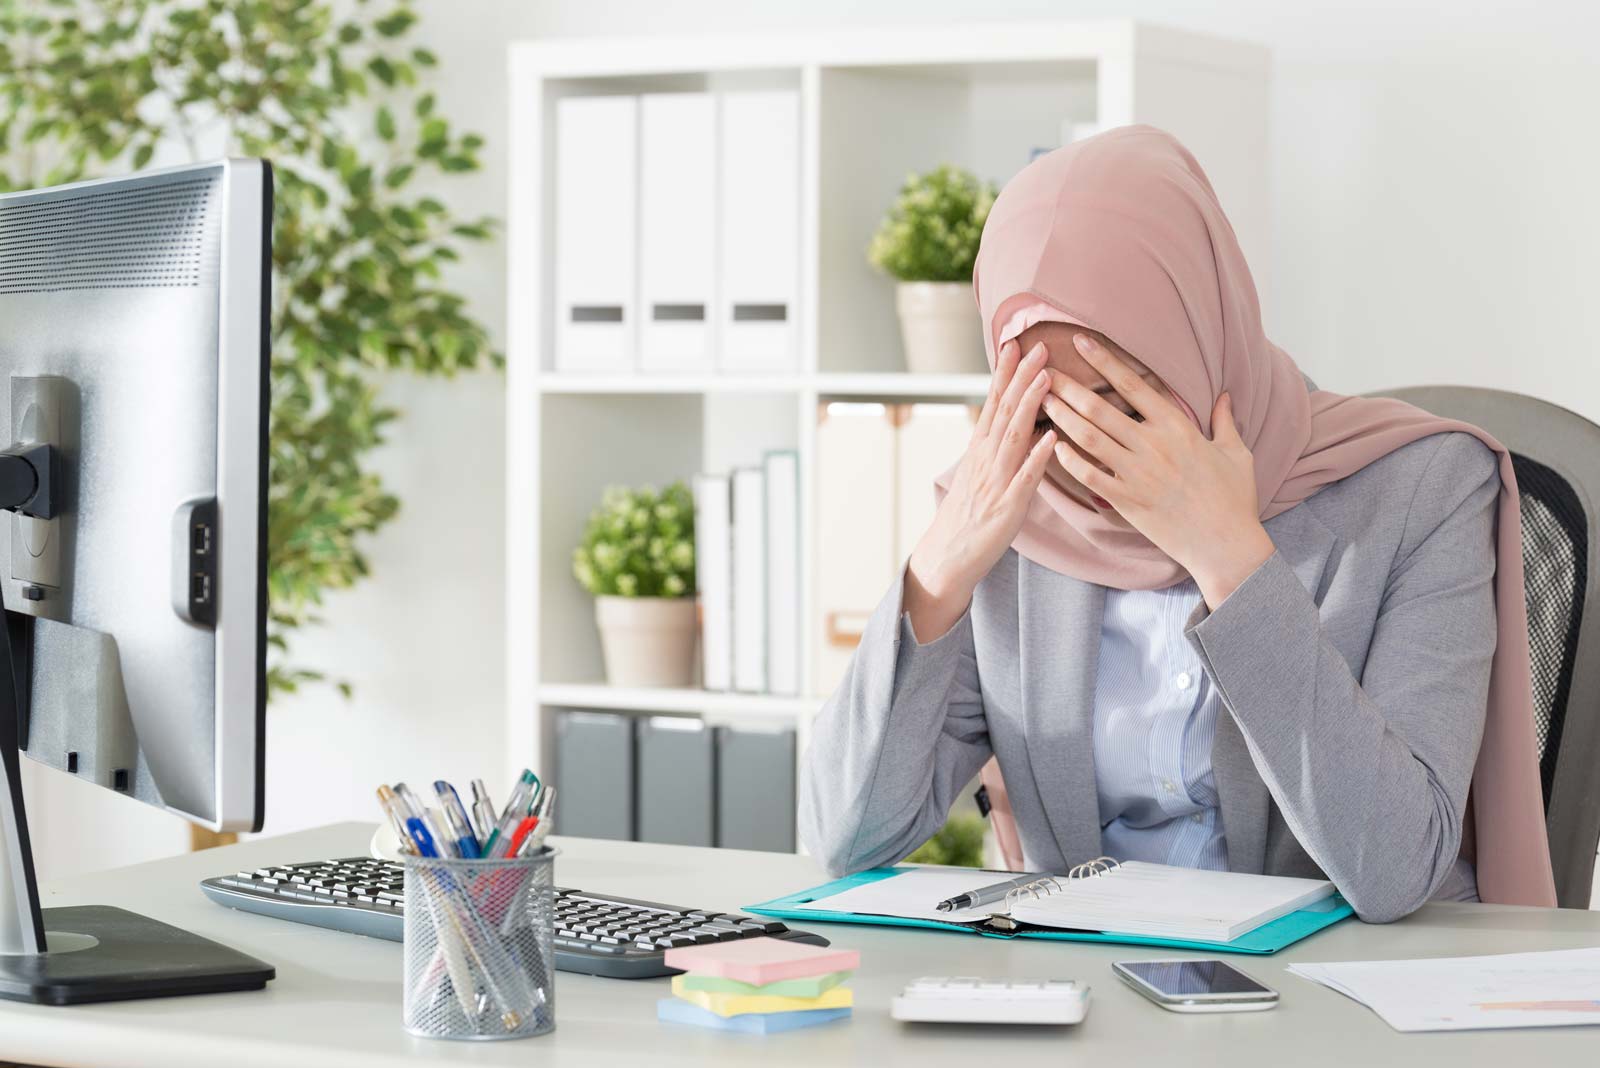 How Can You Pay Full Attention to Your Clients During Ramadan?